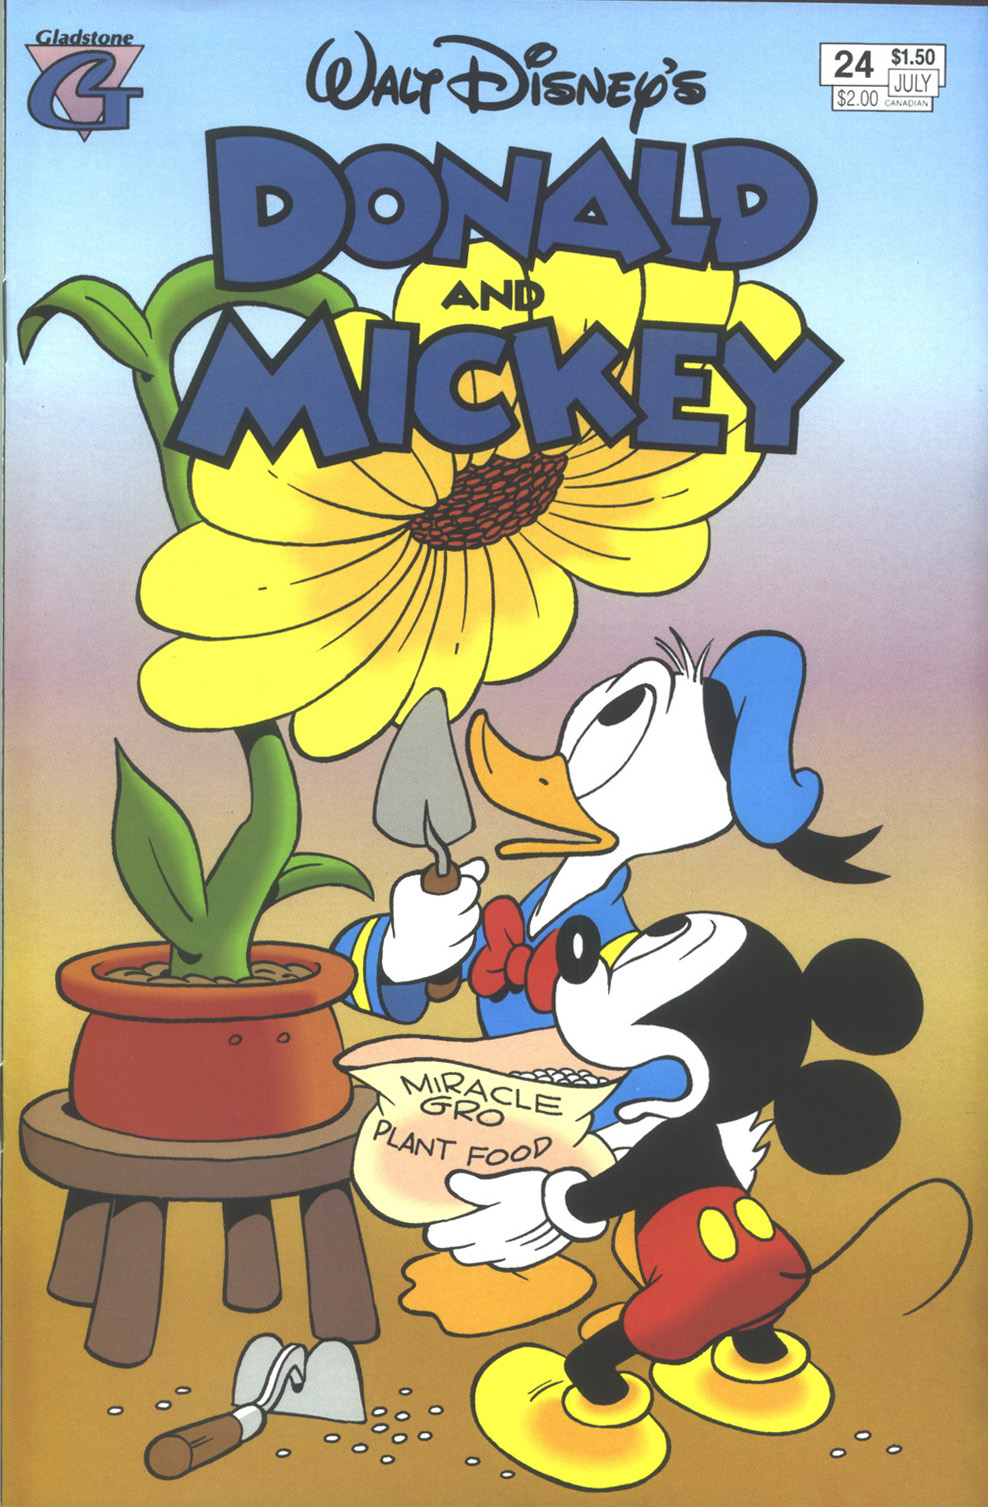 Read online Walt Disney's Donald and Mickey comic -  Issue #24 - 1